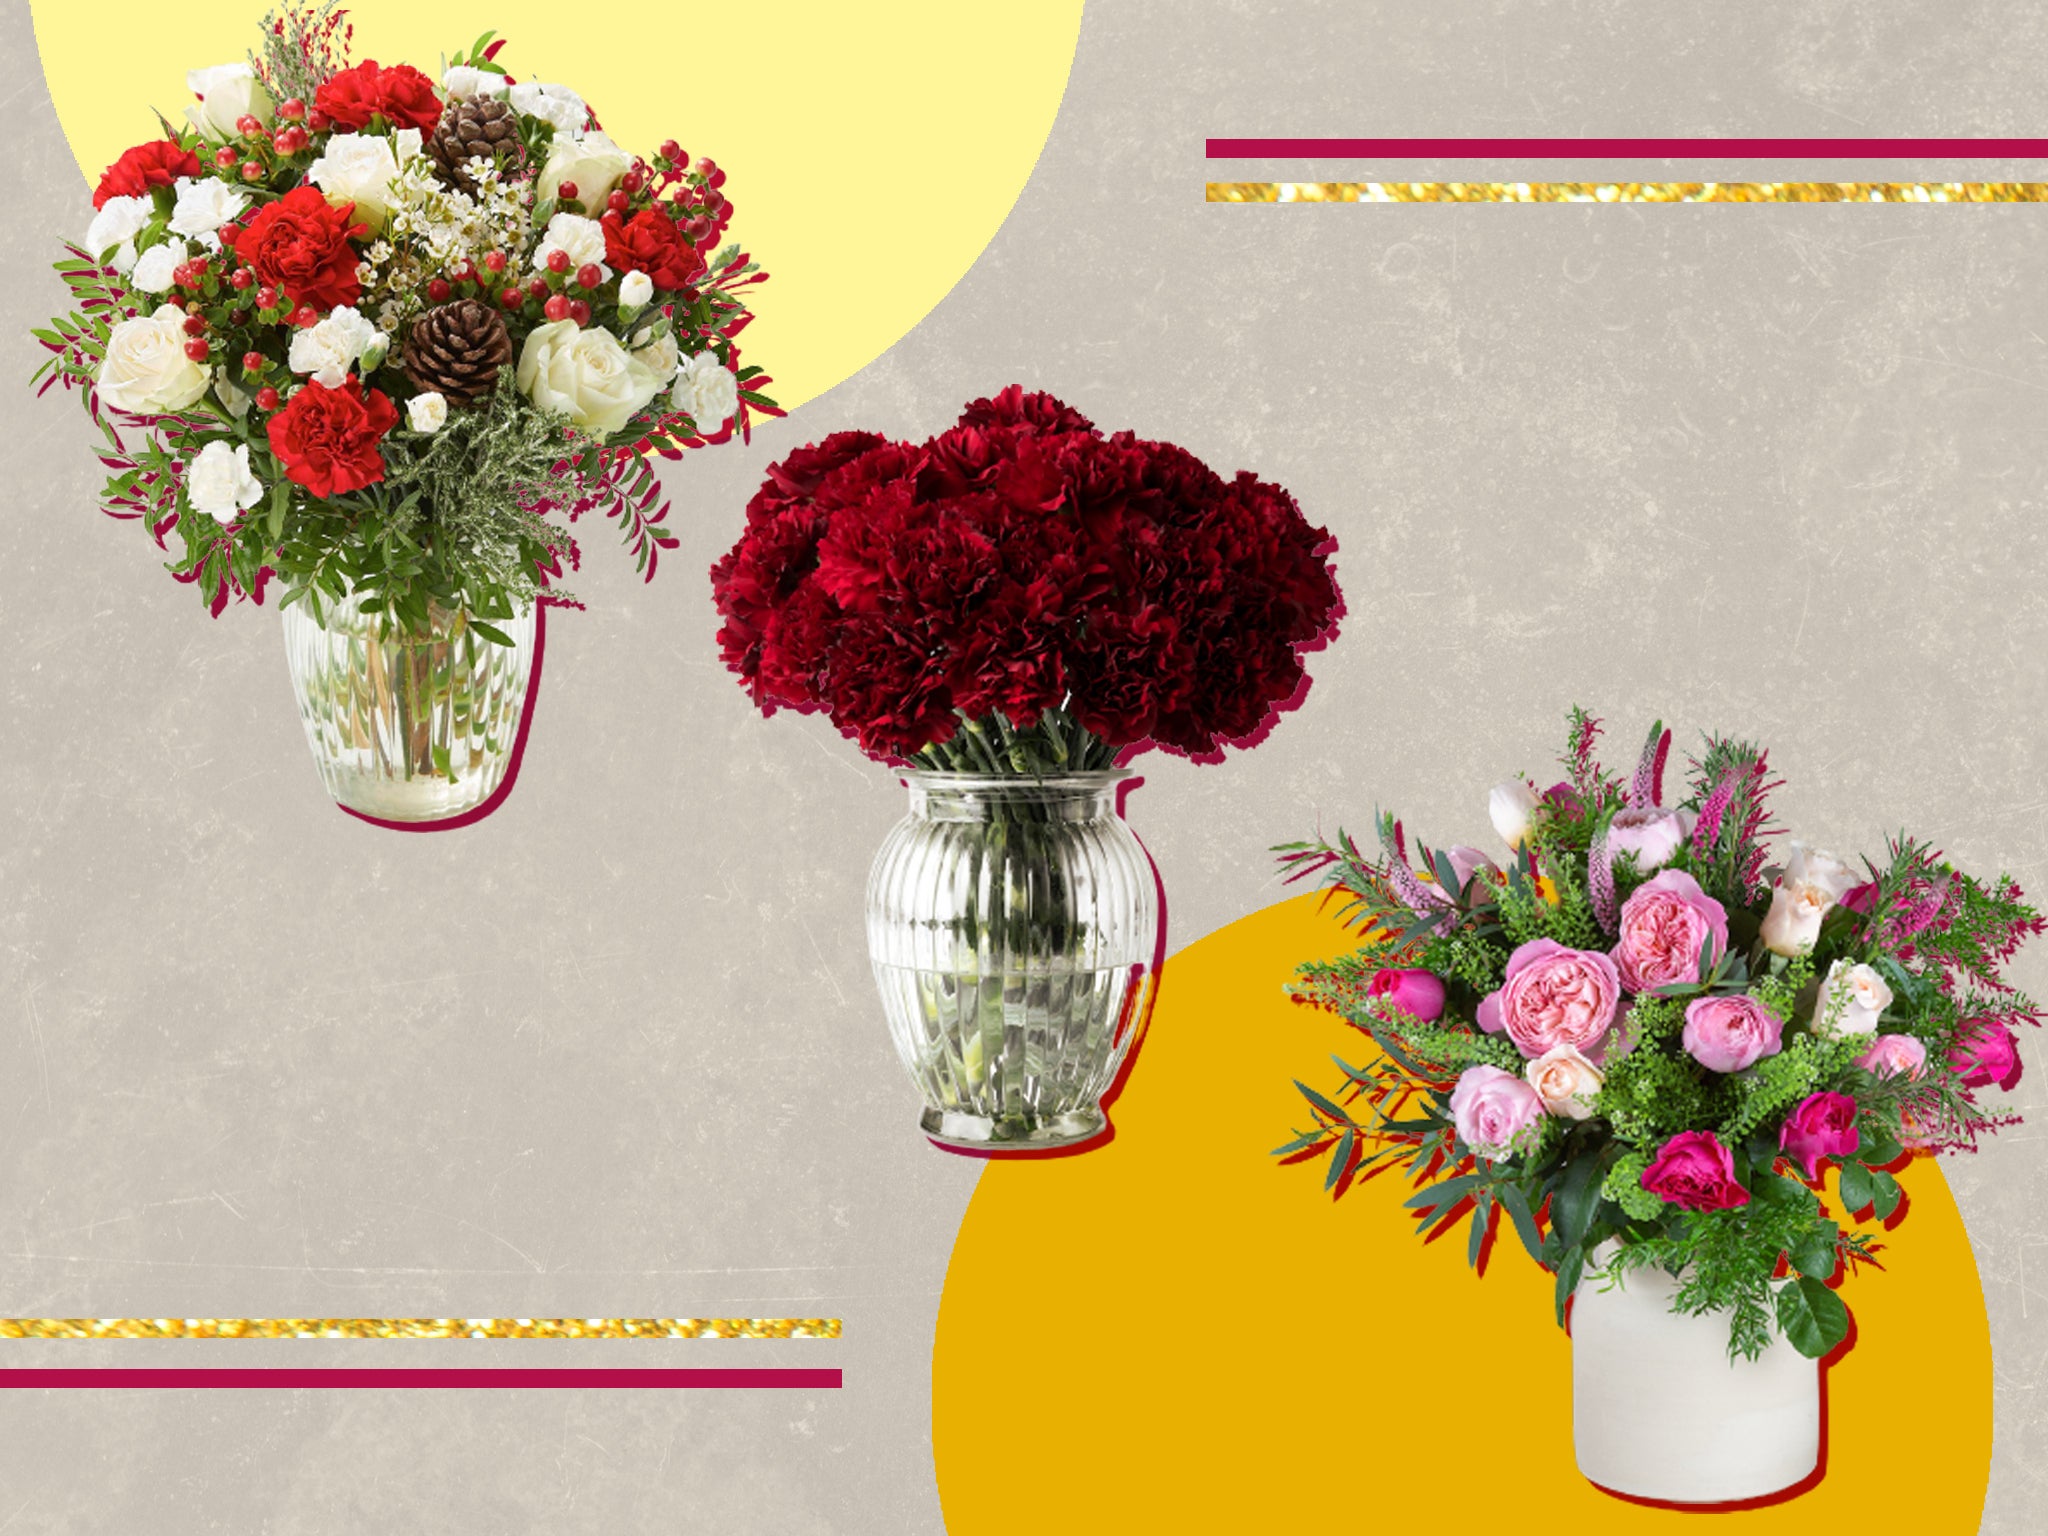 10 best Christmas flower bouquets for spreading festive cheer